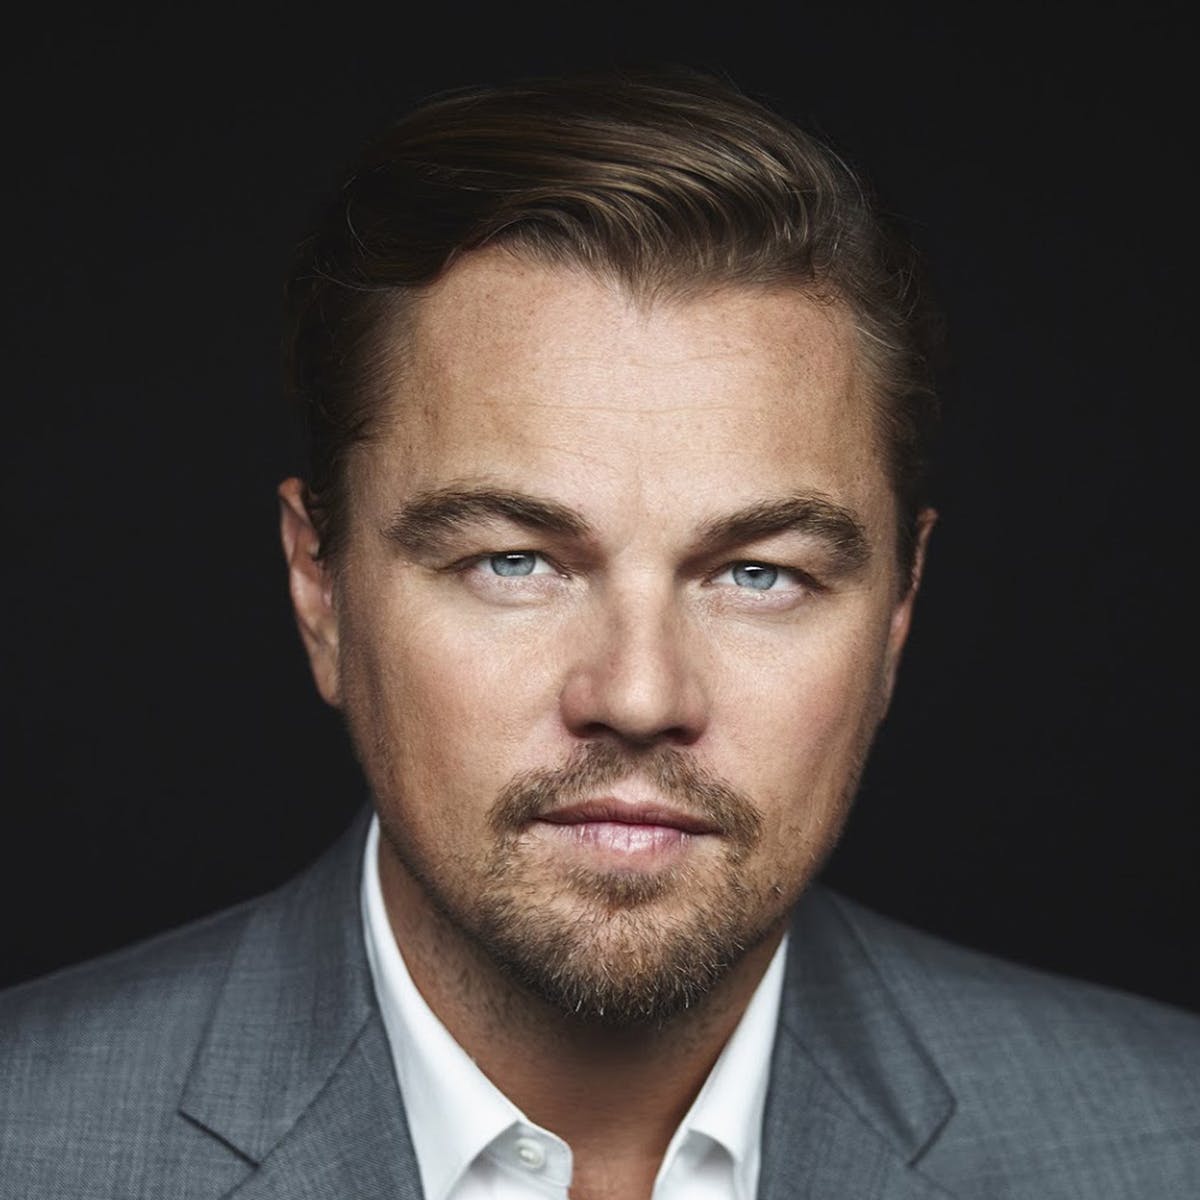 Leonardo DiCaprio Net Worth 2019 - Famous Actor - Foreign policy